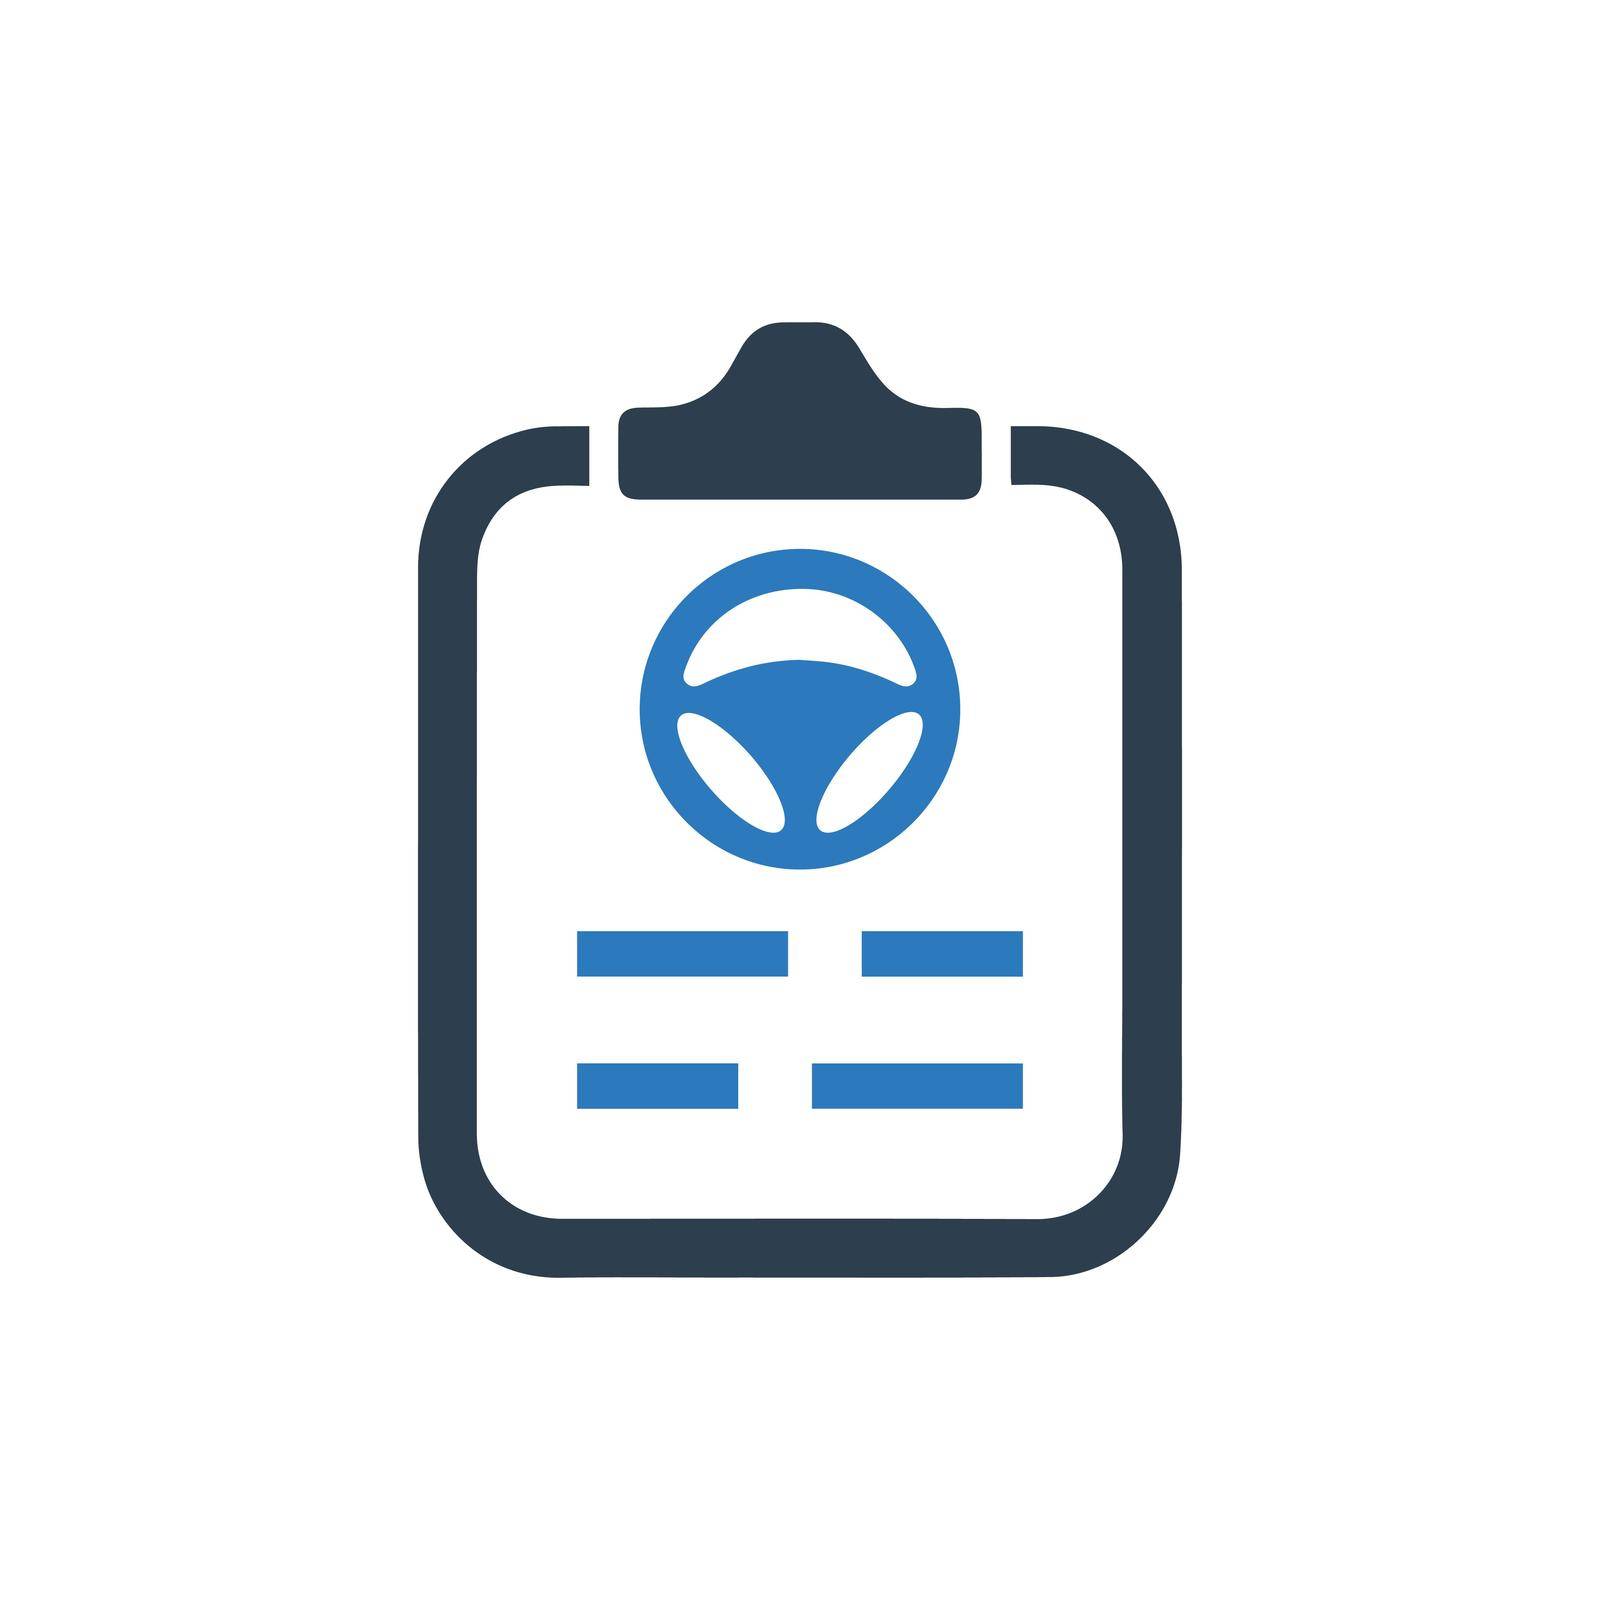 Auto Insurance Policy icon. Meticulously designed vector EPS file.